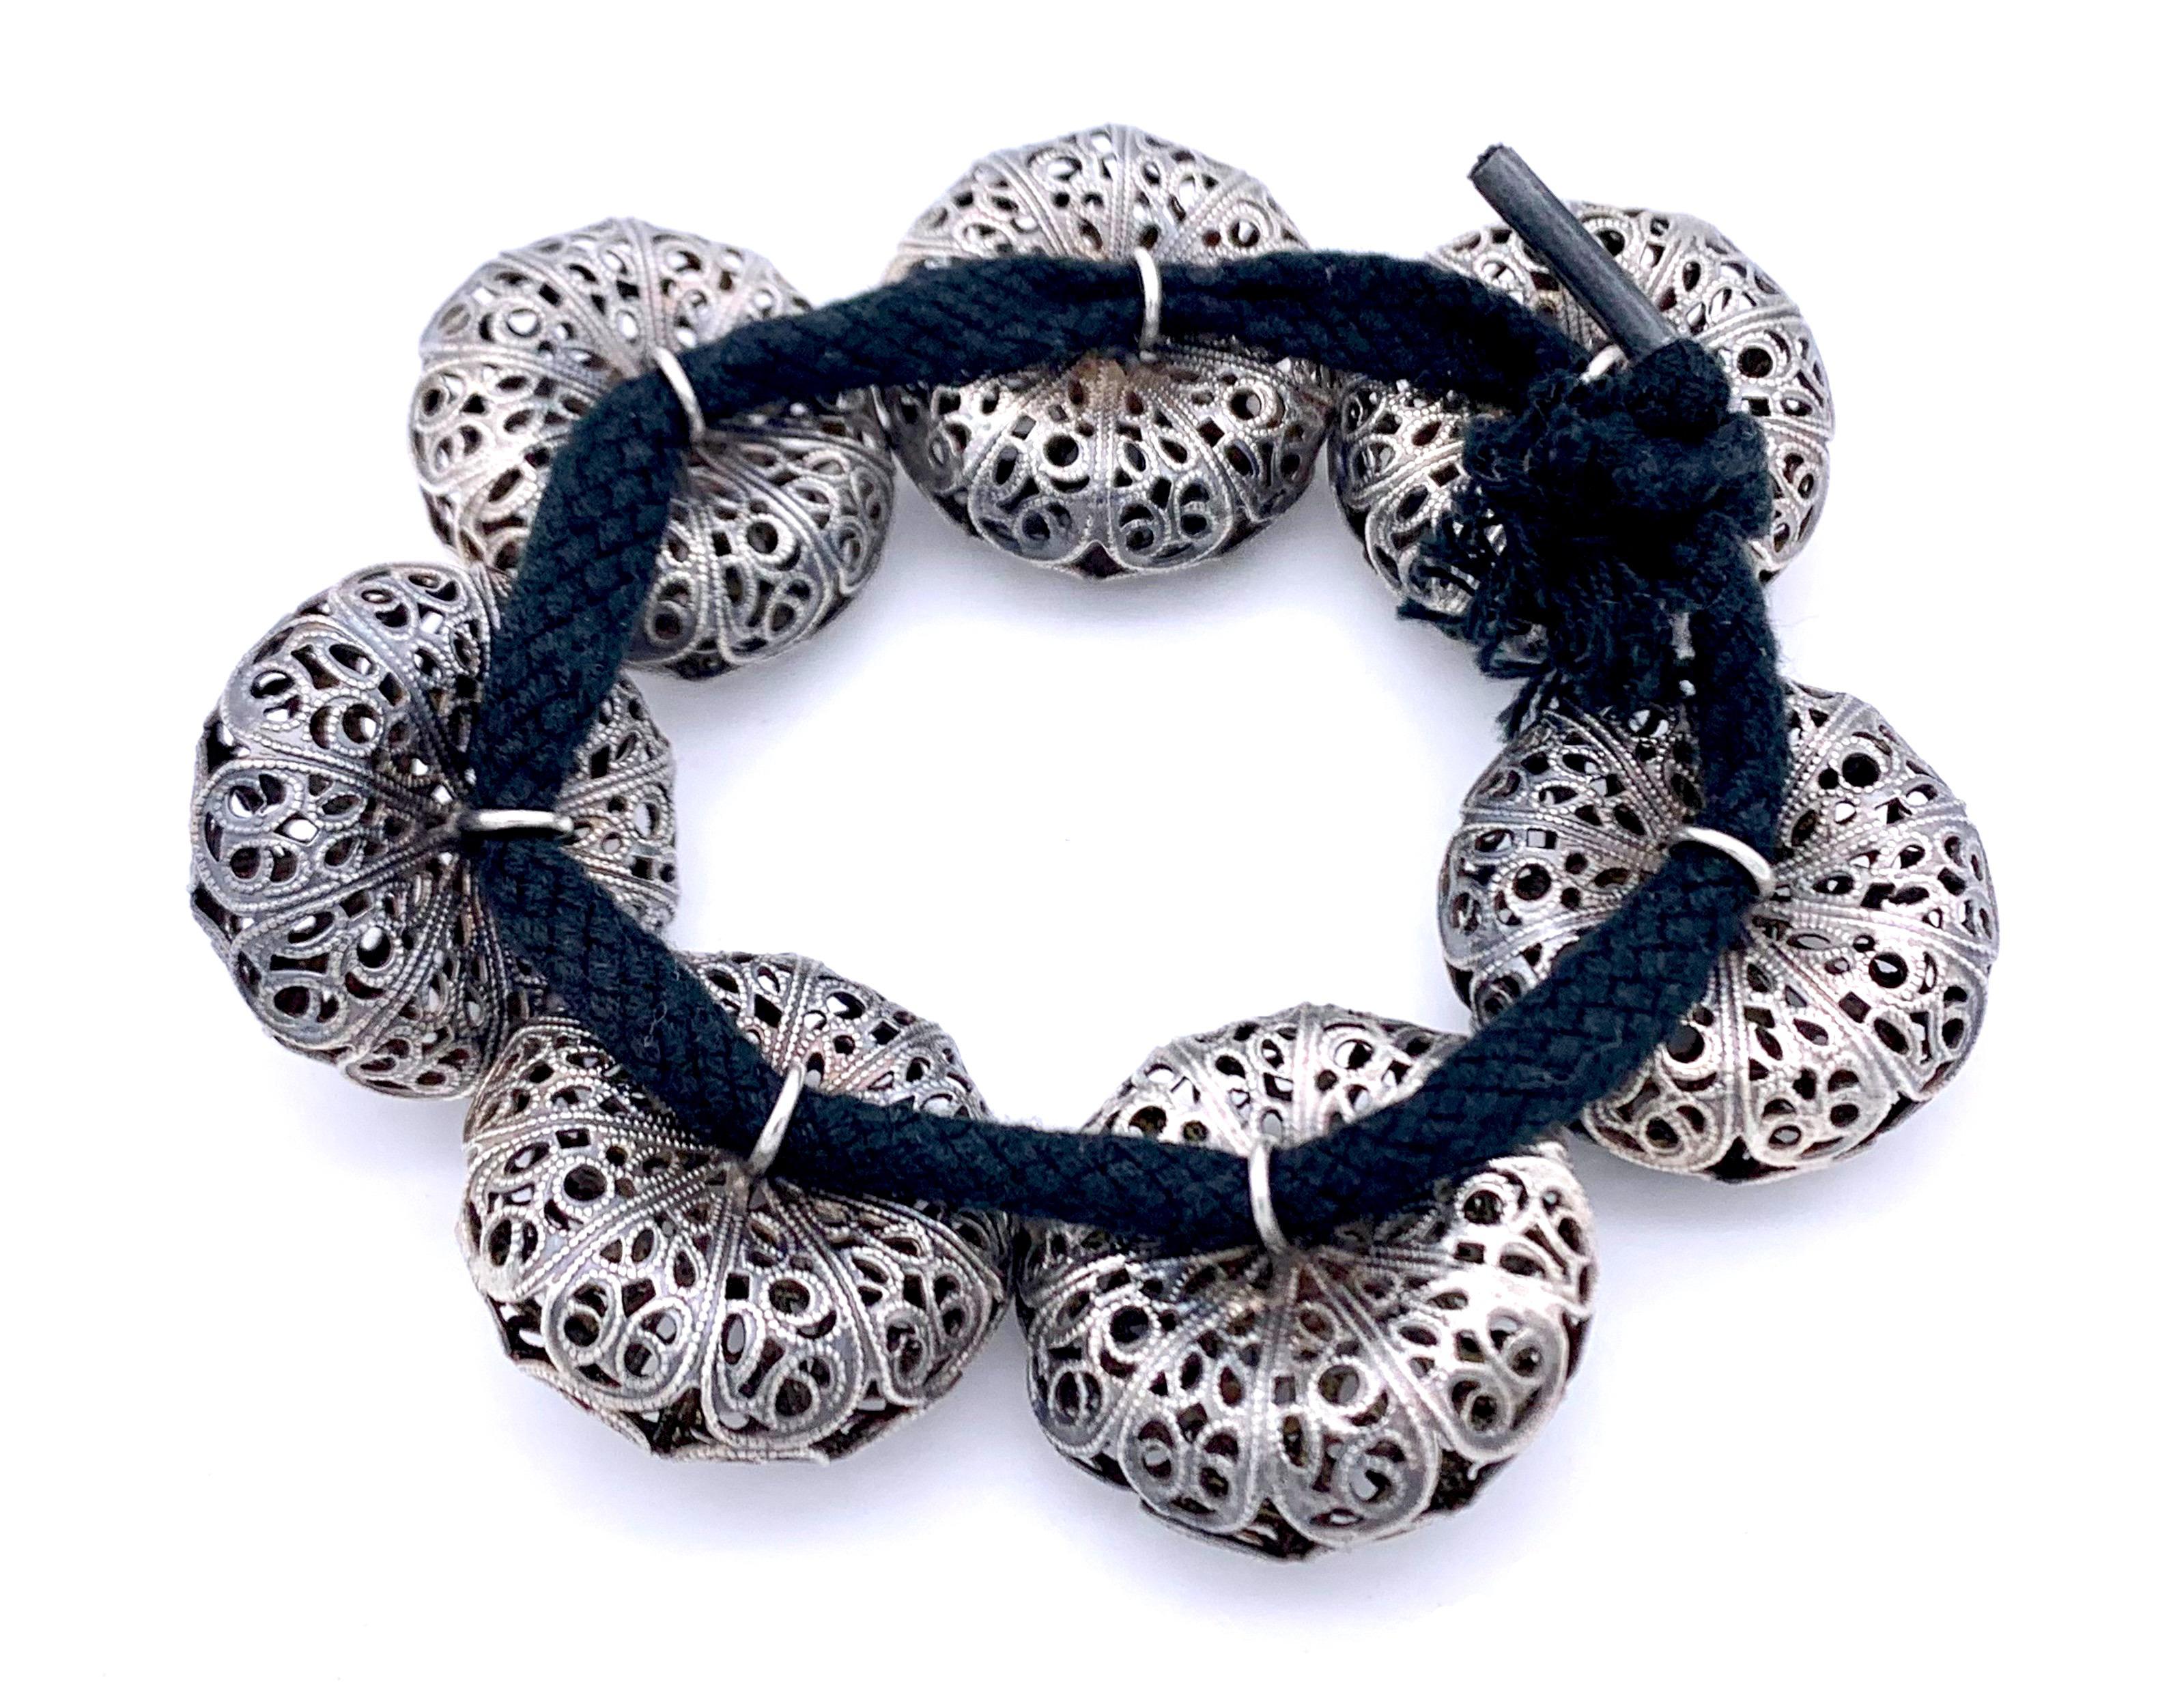 These wonderful silver buttons are strung onto a  black cotton string to make up a bracelet.
The buttons were hand crafted in the second quarter of the 19th century. Fine silver wire work is decorated with silver flowers and applied lozenge shapes. 
